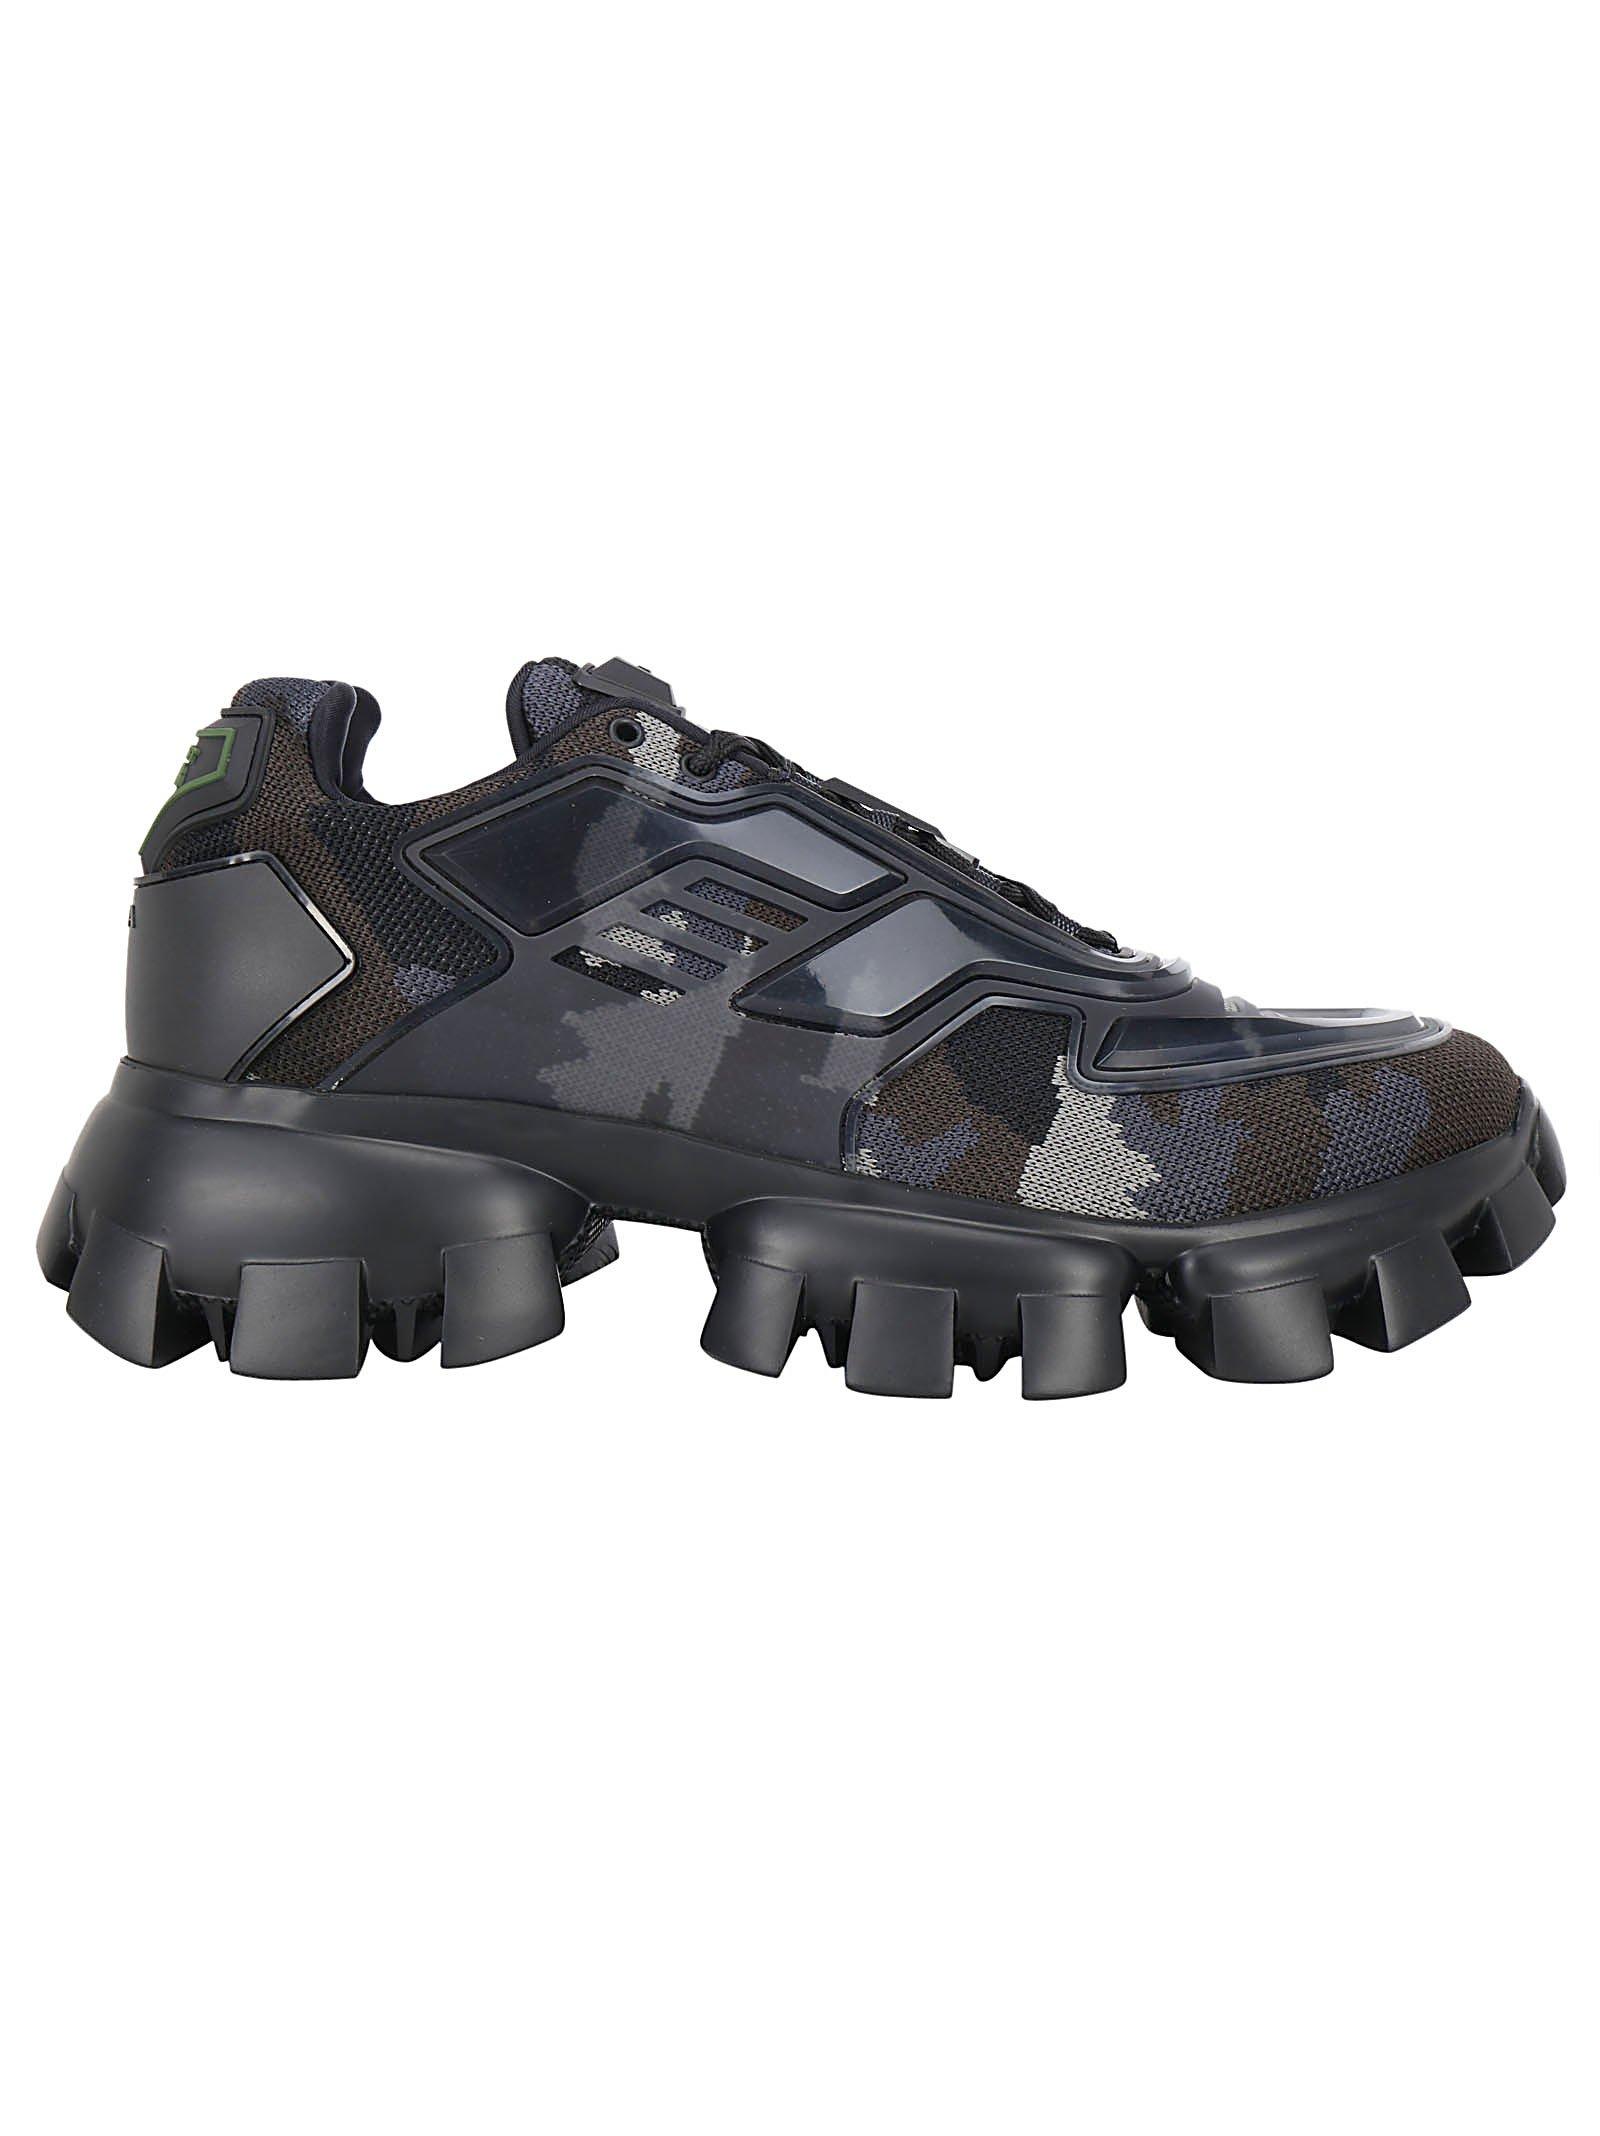 Prada Cloudbust Thunder Camouflage Sneakers for Men | Lyst